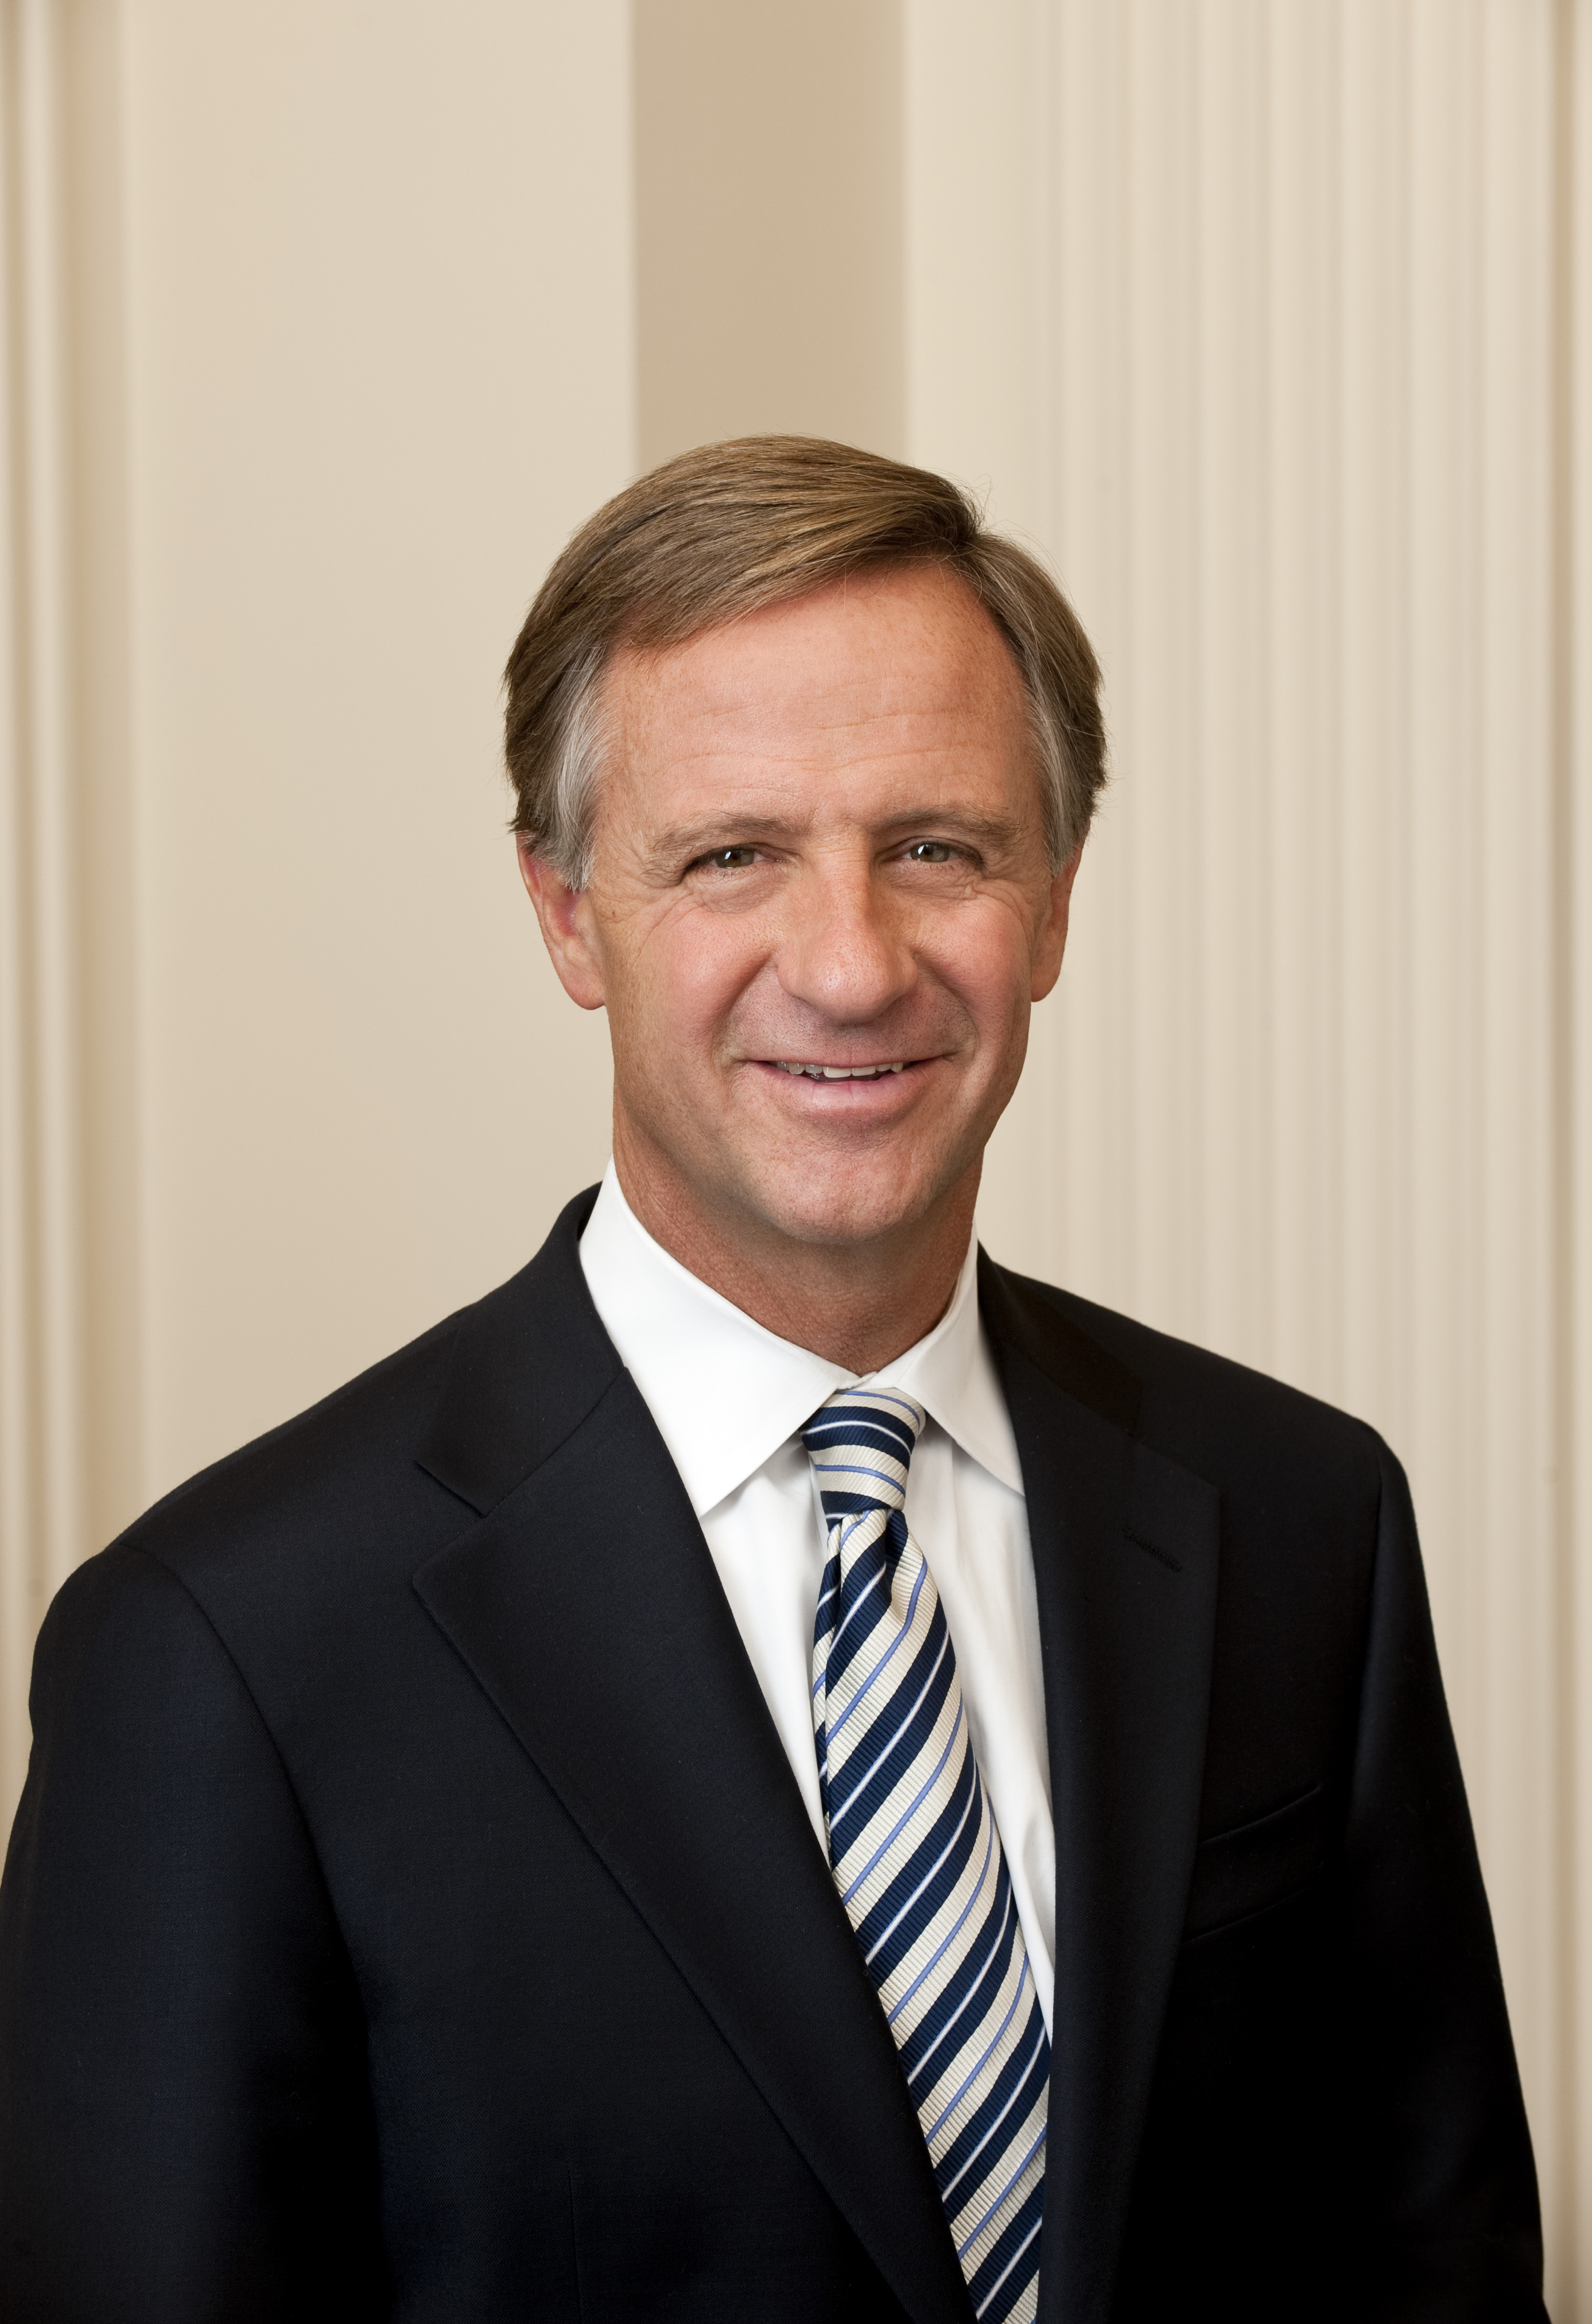 Governor Haslam Applauds Passage Of IMPROVE Act That Is Headed To His Desk